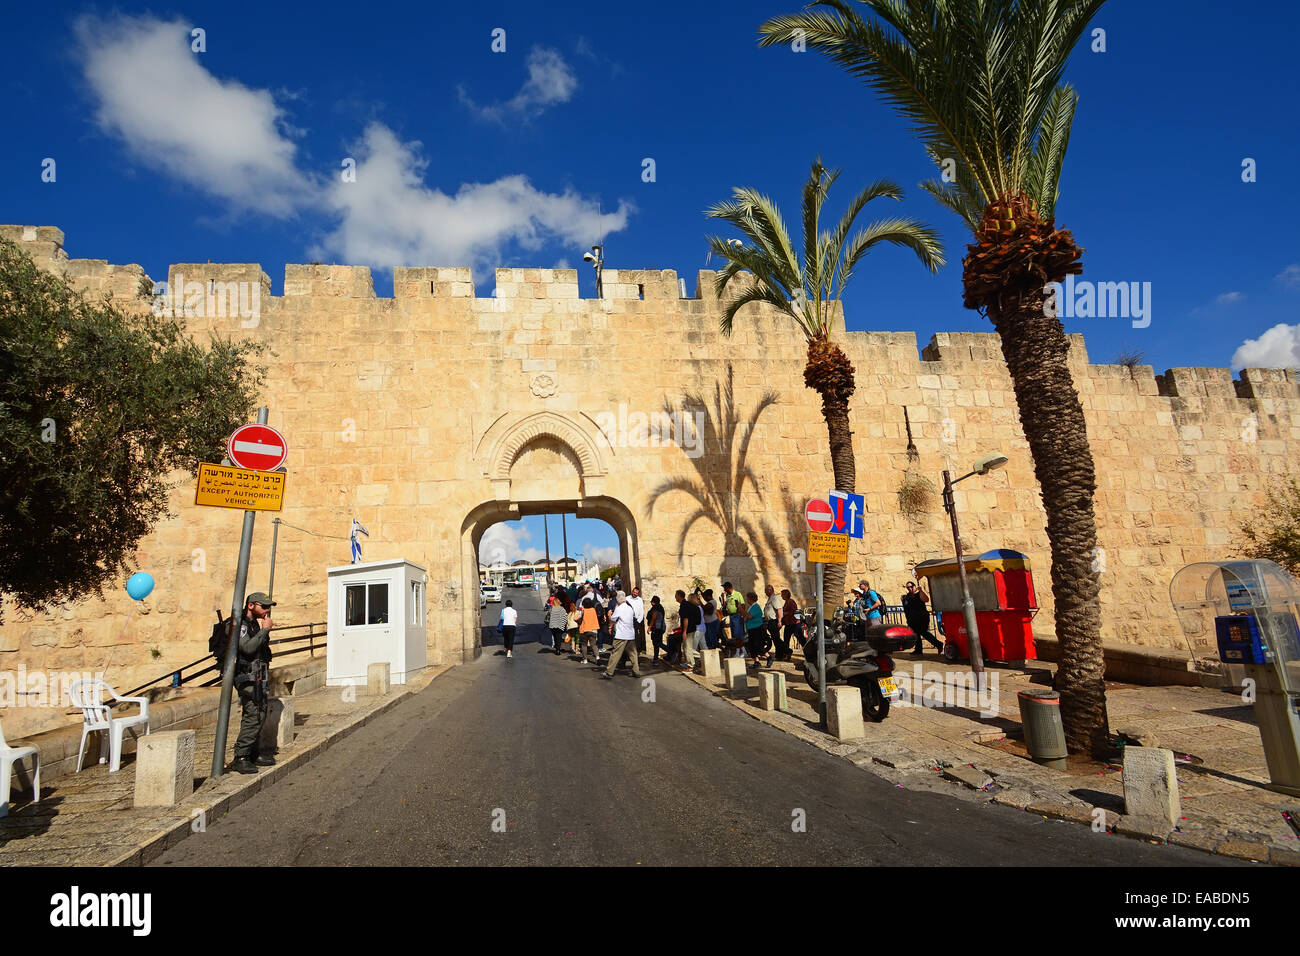 Dung gate, Ha'ashpot gate, in the ancient walls of the old city, Jerusalem, Israe Stock Photo